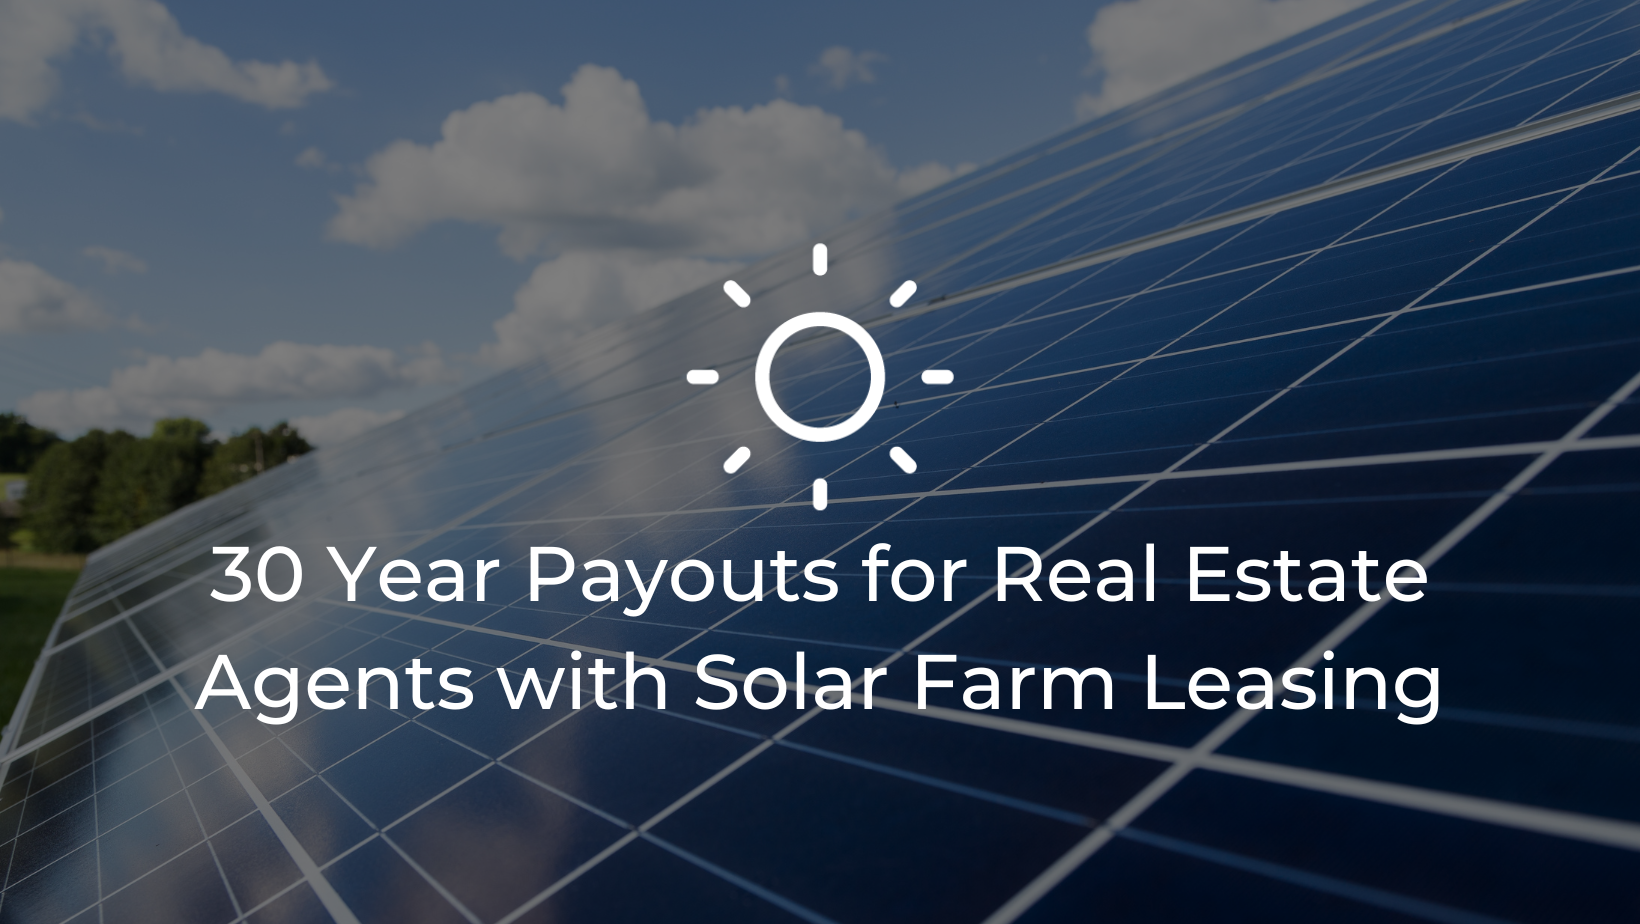 30 Year Payouts for Real Estate Agents with Solar Farm Leasing